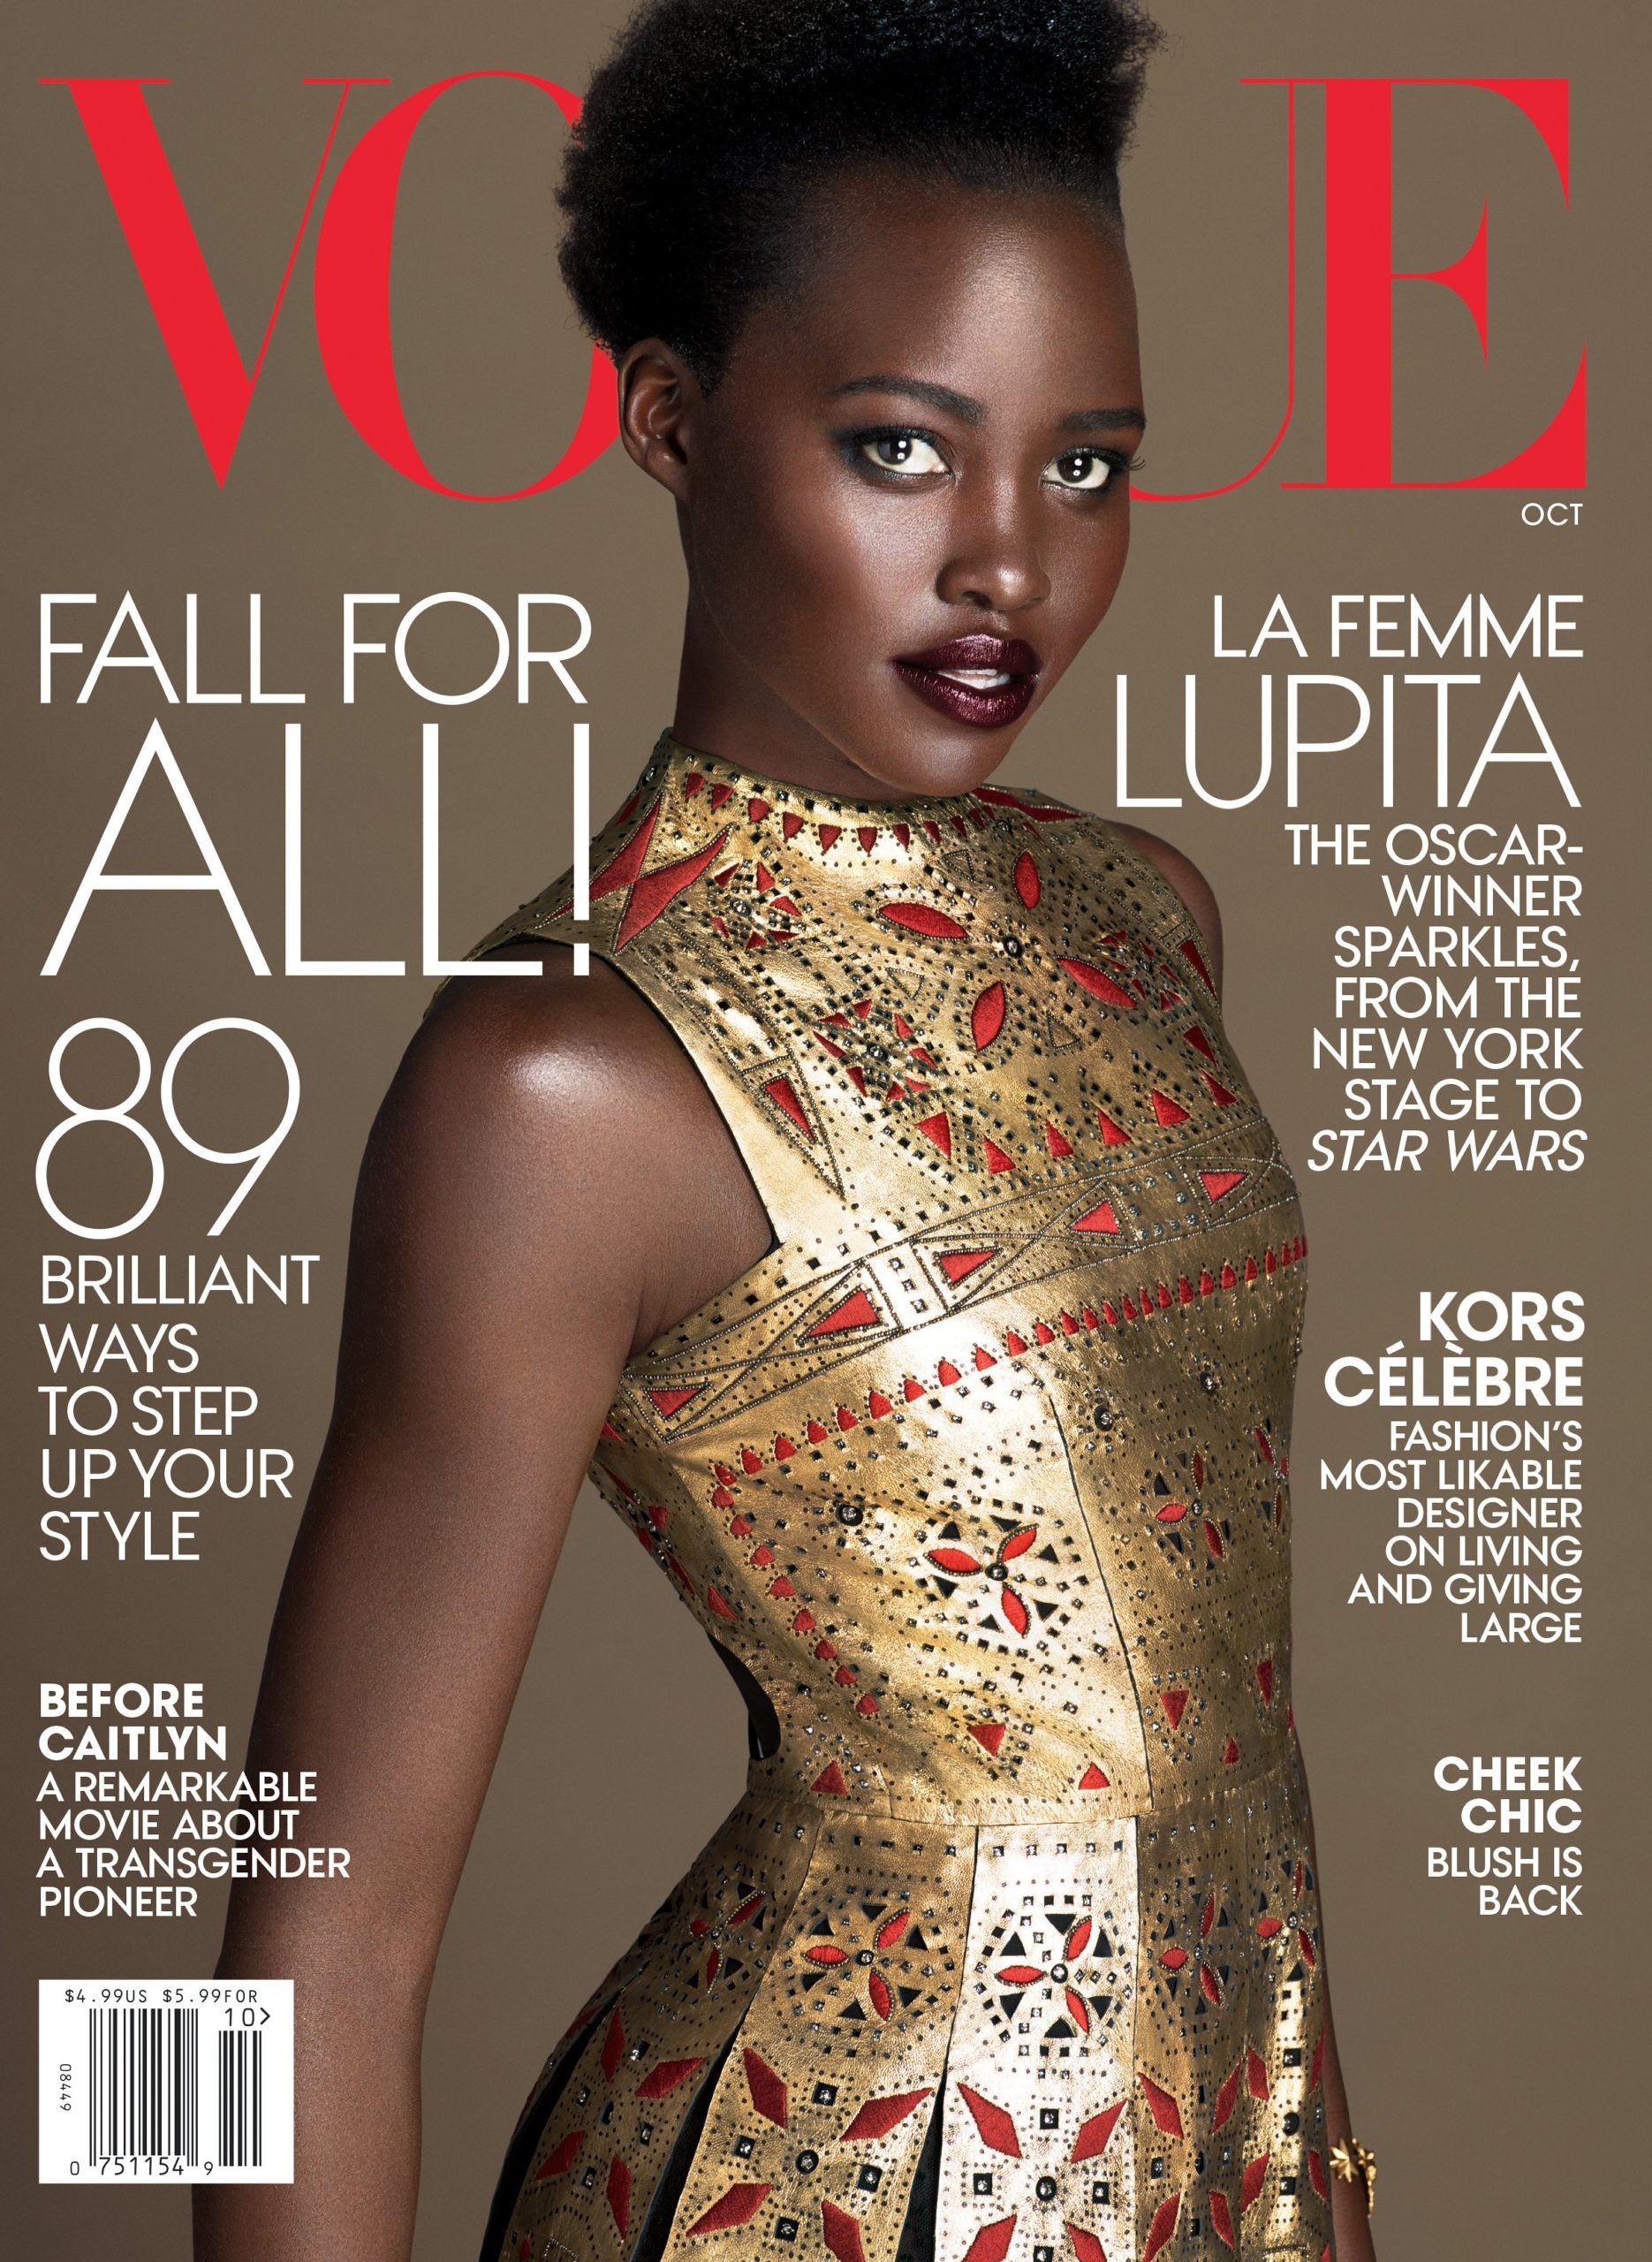 Makeup, Trends, 2016, 2017, Lupita, Nyong’o's, October, 2015, Vogue, Magazine, Cover, Wearing, Lancome